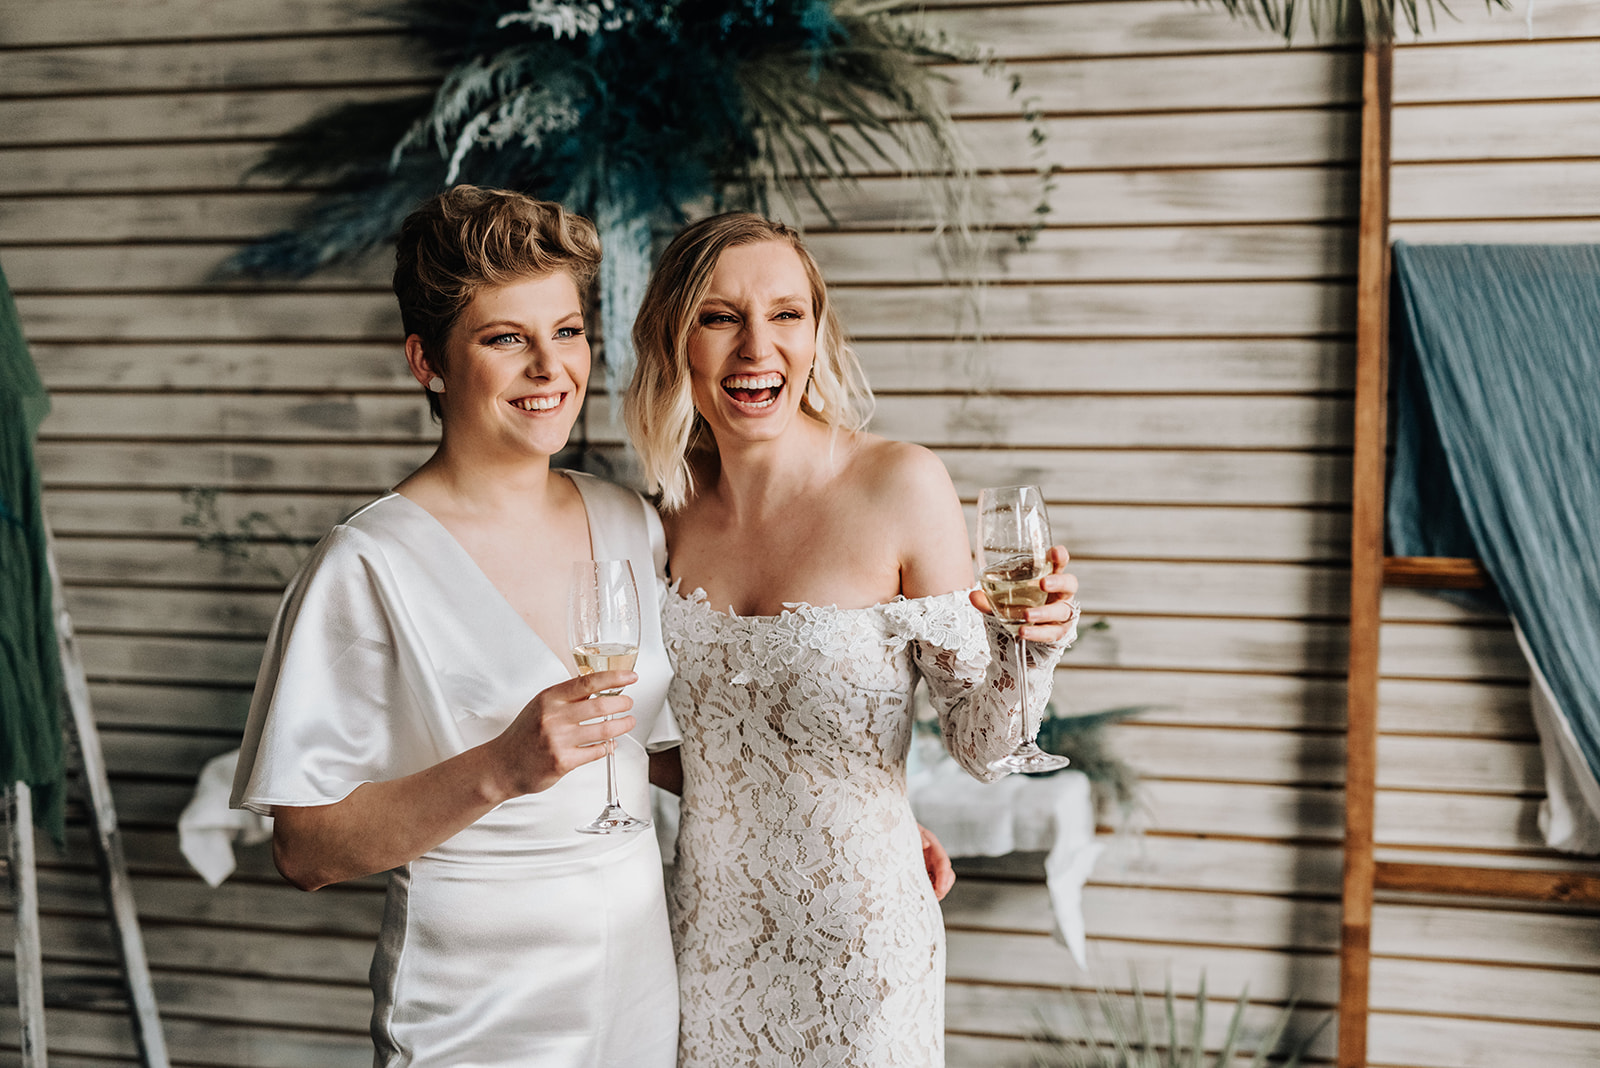 Brides share champagne during their intimate bohemian elopement